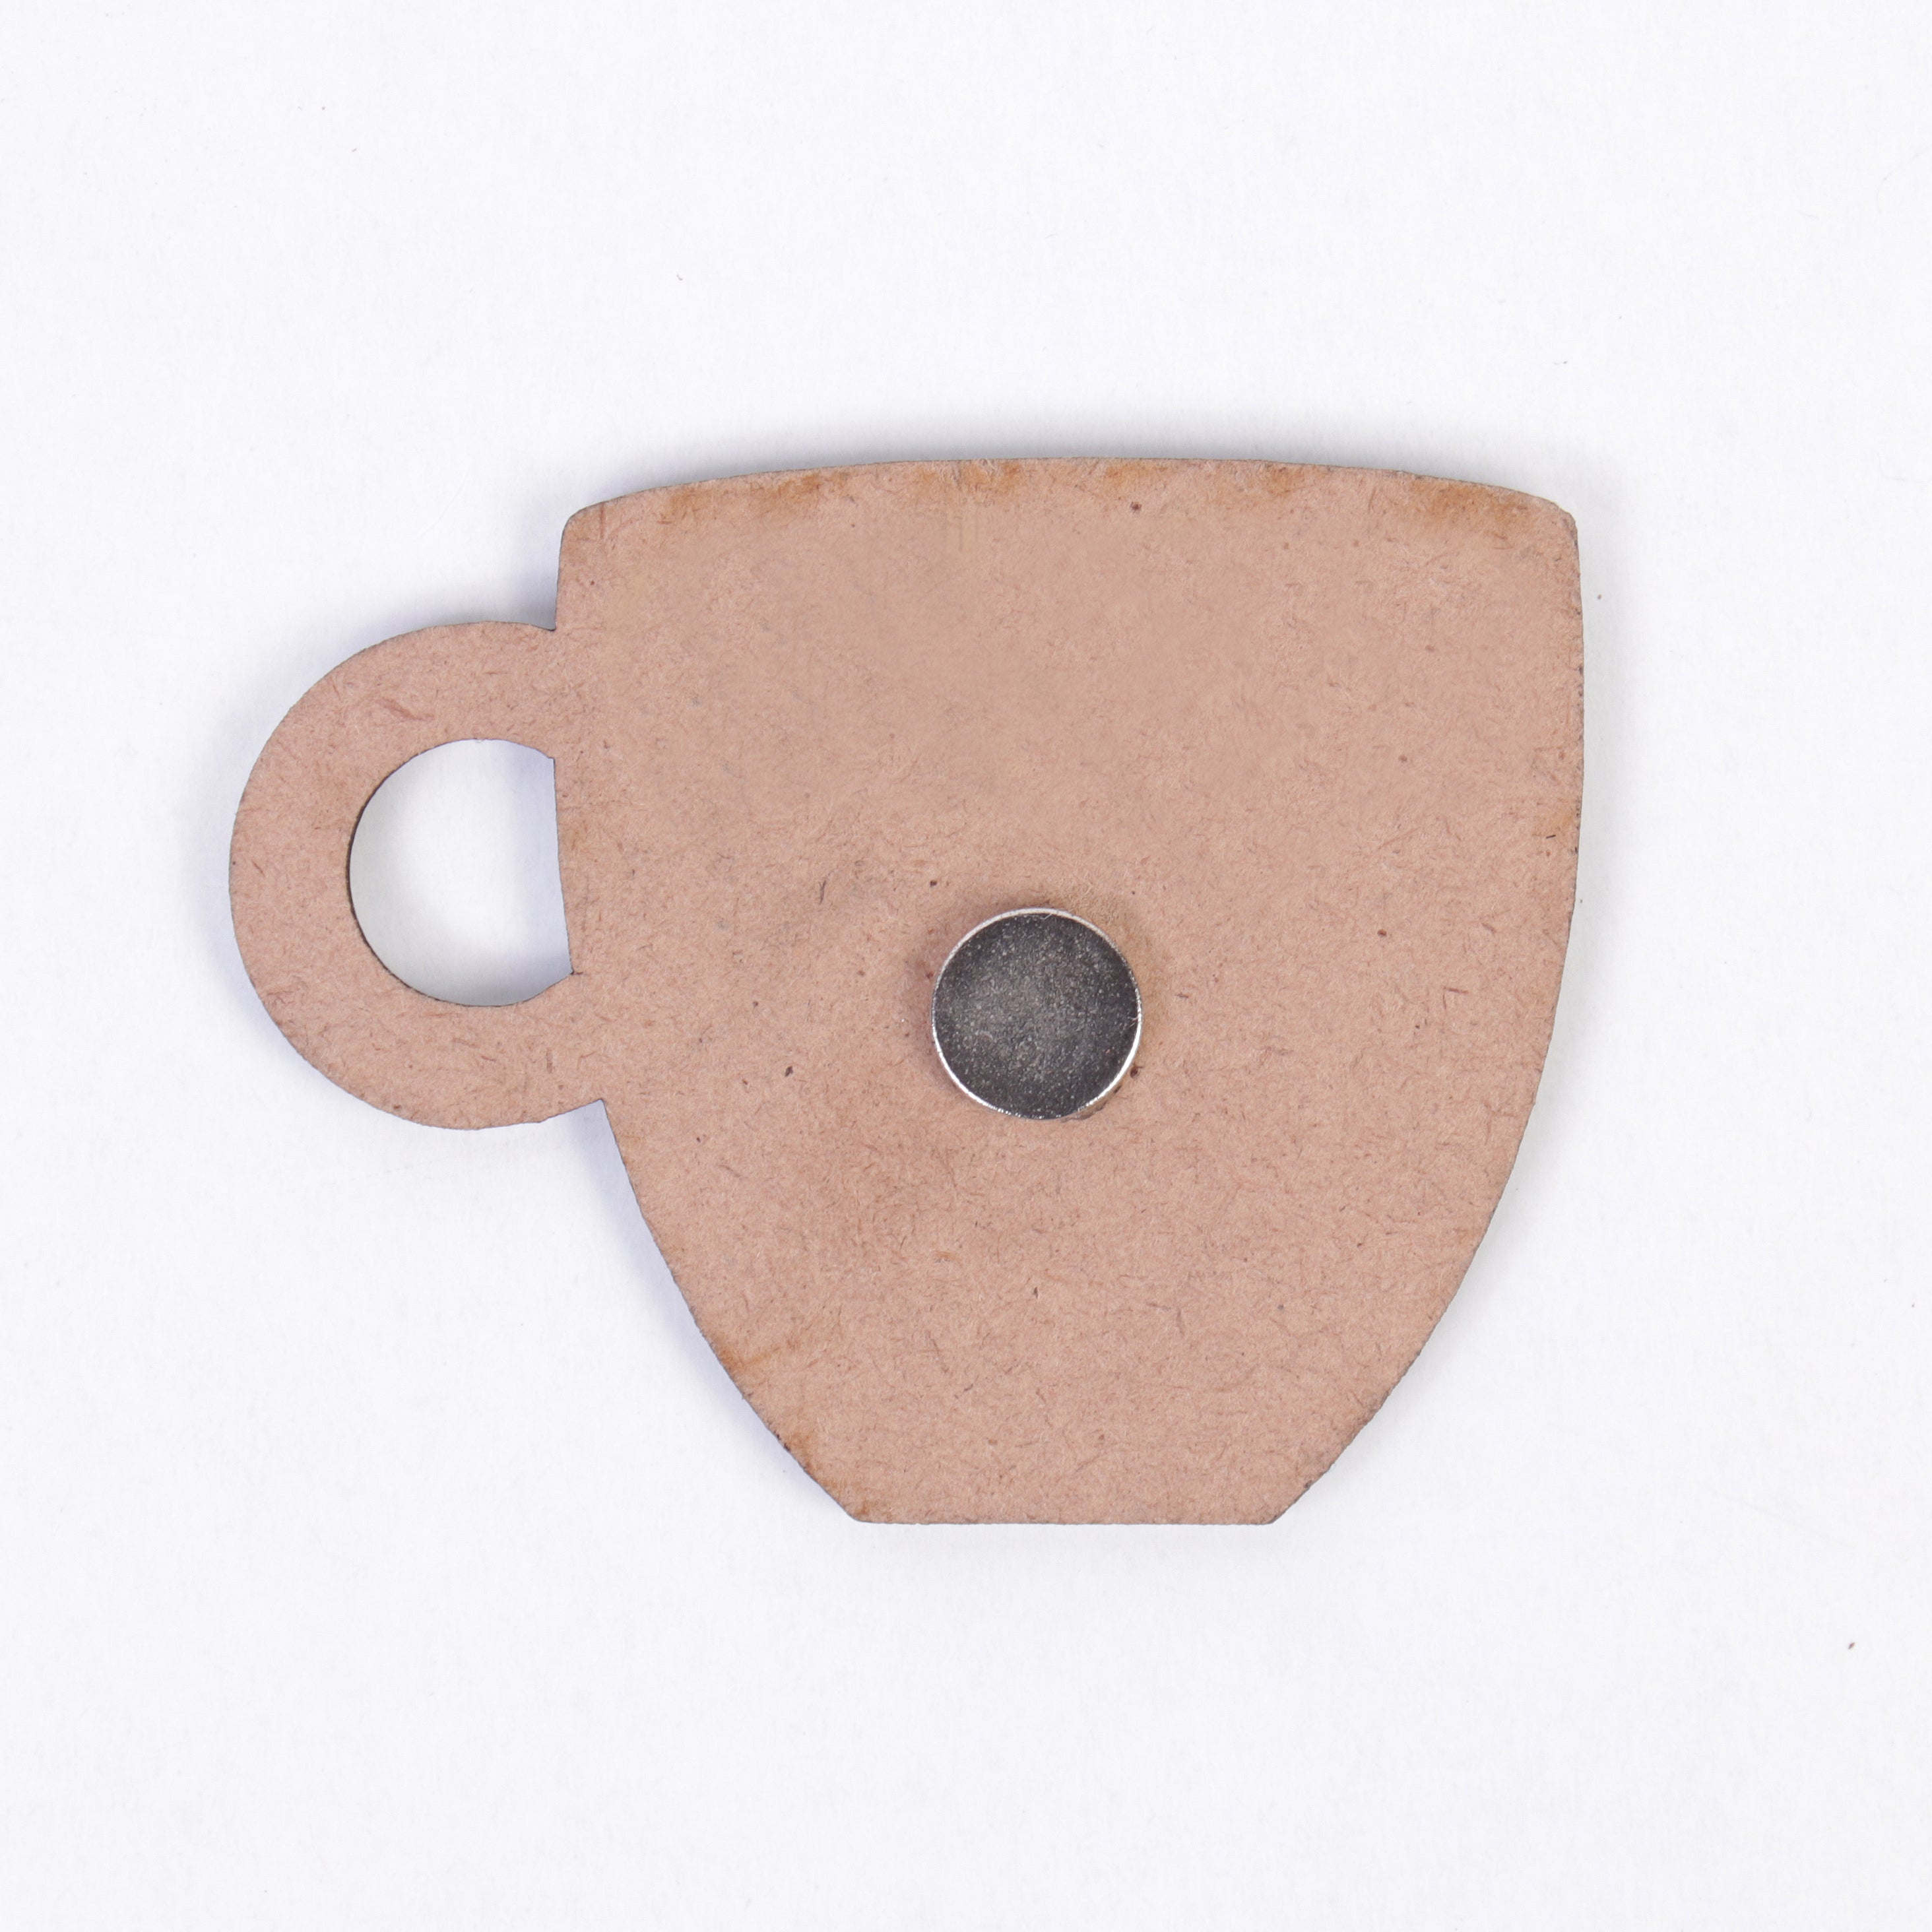 MDF Fridge Magnet Blank - Cup, 2.5in x 2in, Thickness 2mm